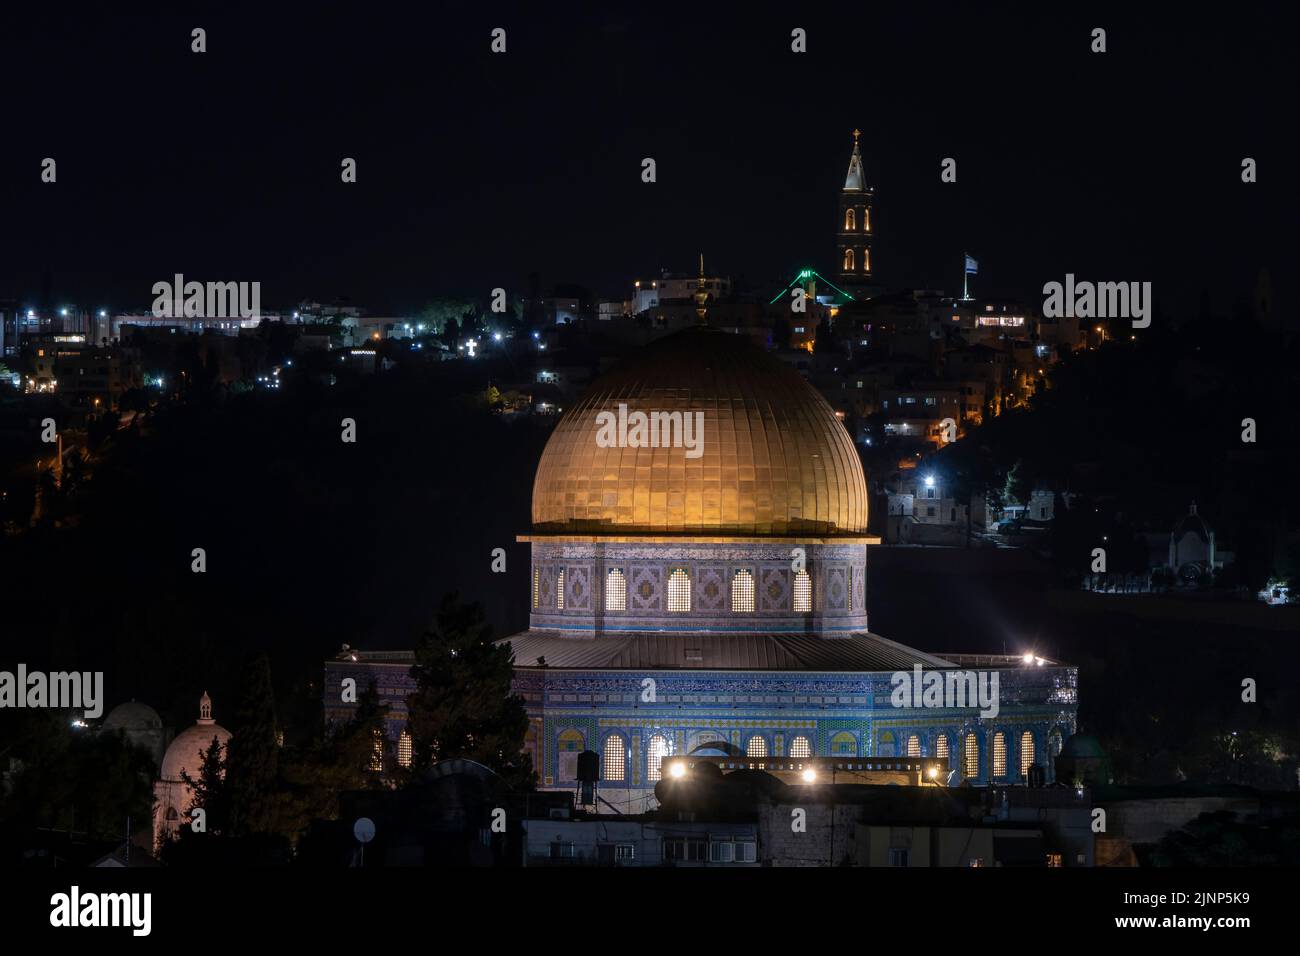 View at night of Dome of the Rock in the Temple Mount known to Muslims as the Haram esh-Sharif in the Old City East Jerusalem Israel Stock Photo